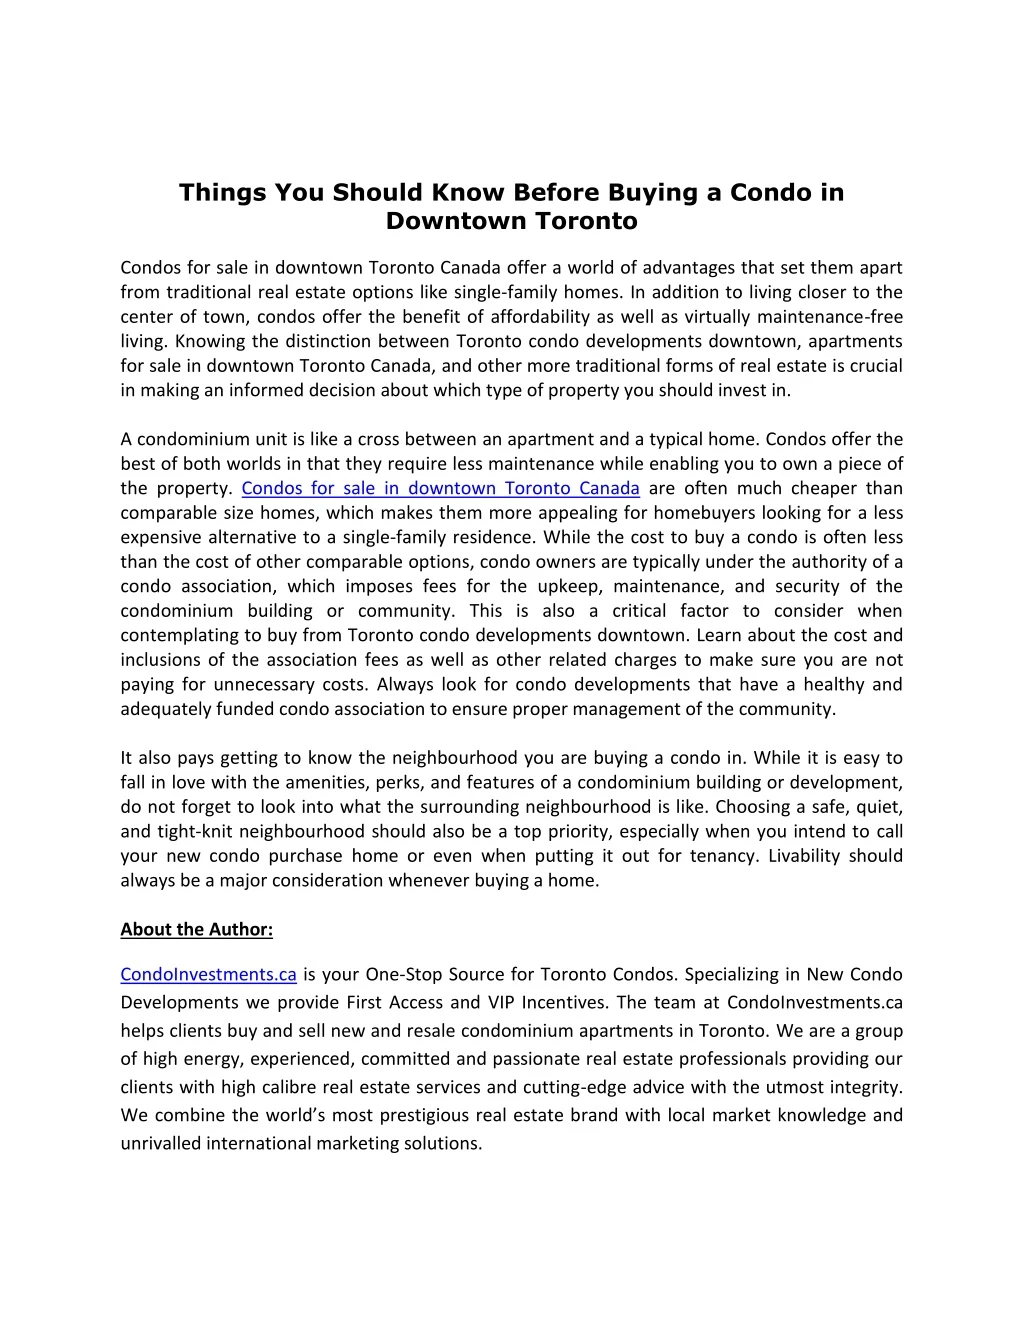 things you should know before buying a condo